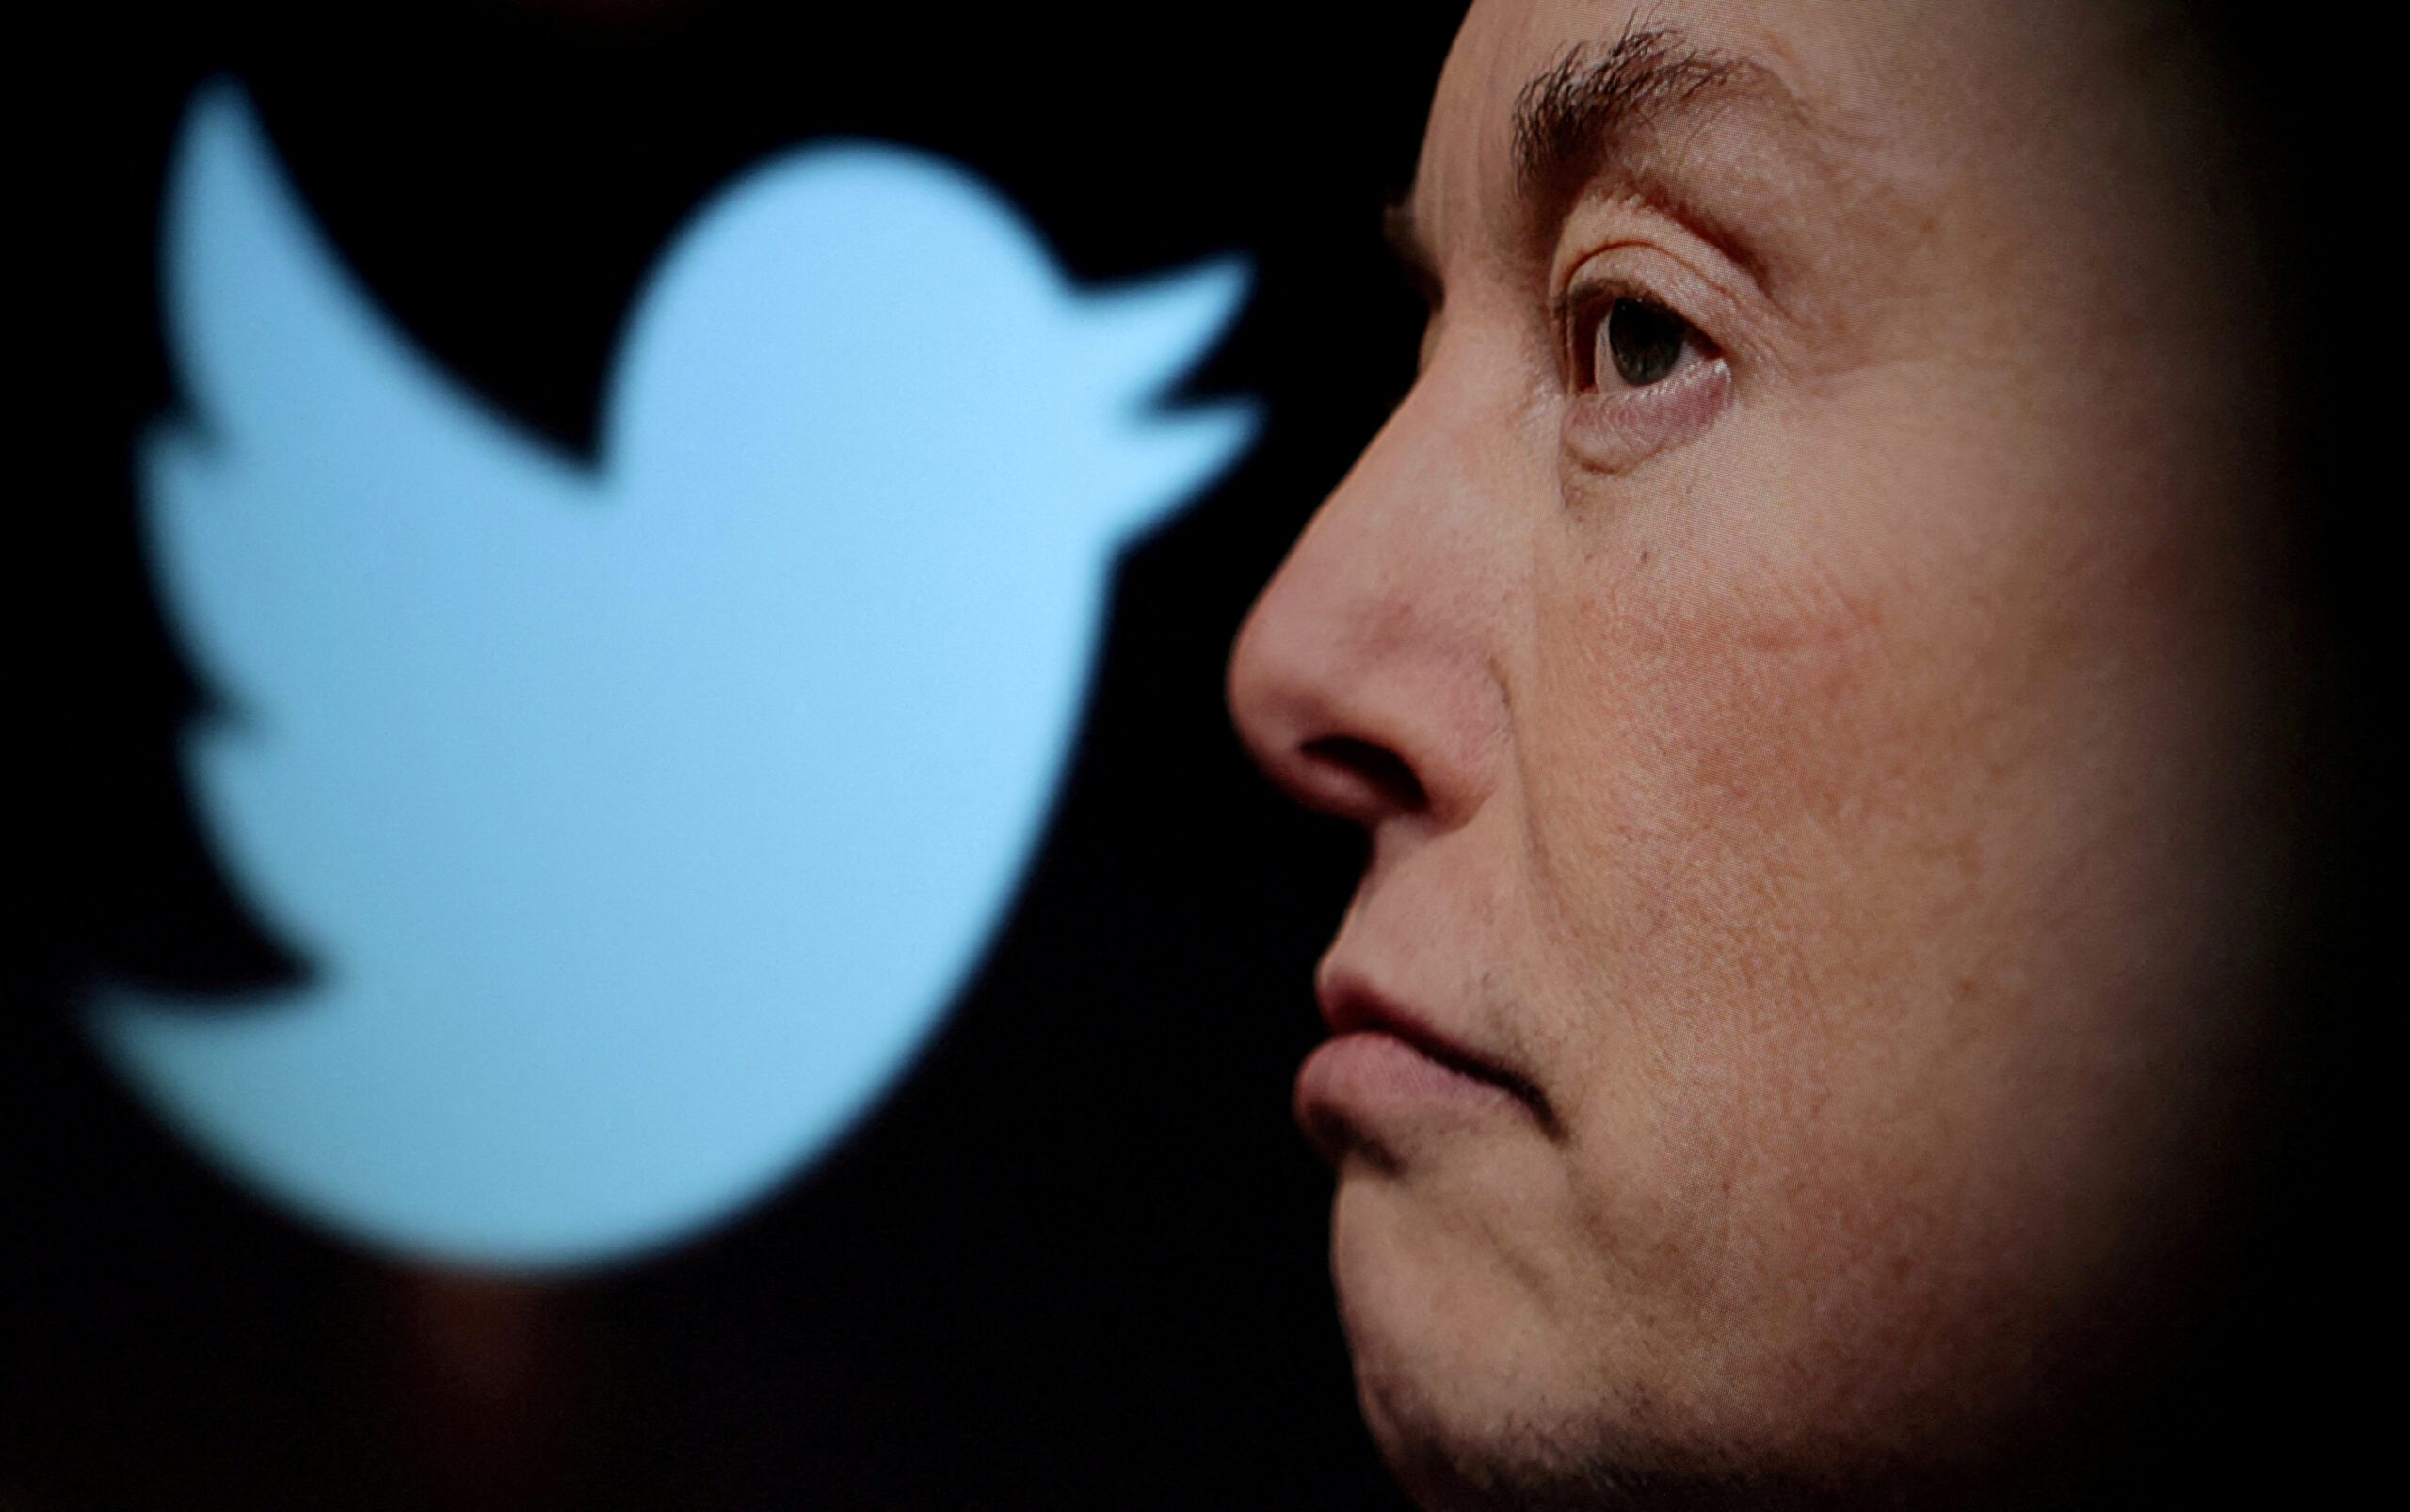 Musk to jury: Just because I tweet something, doesn’t mean people believe it